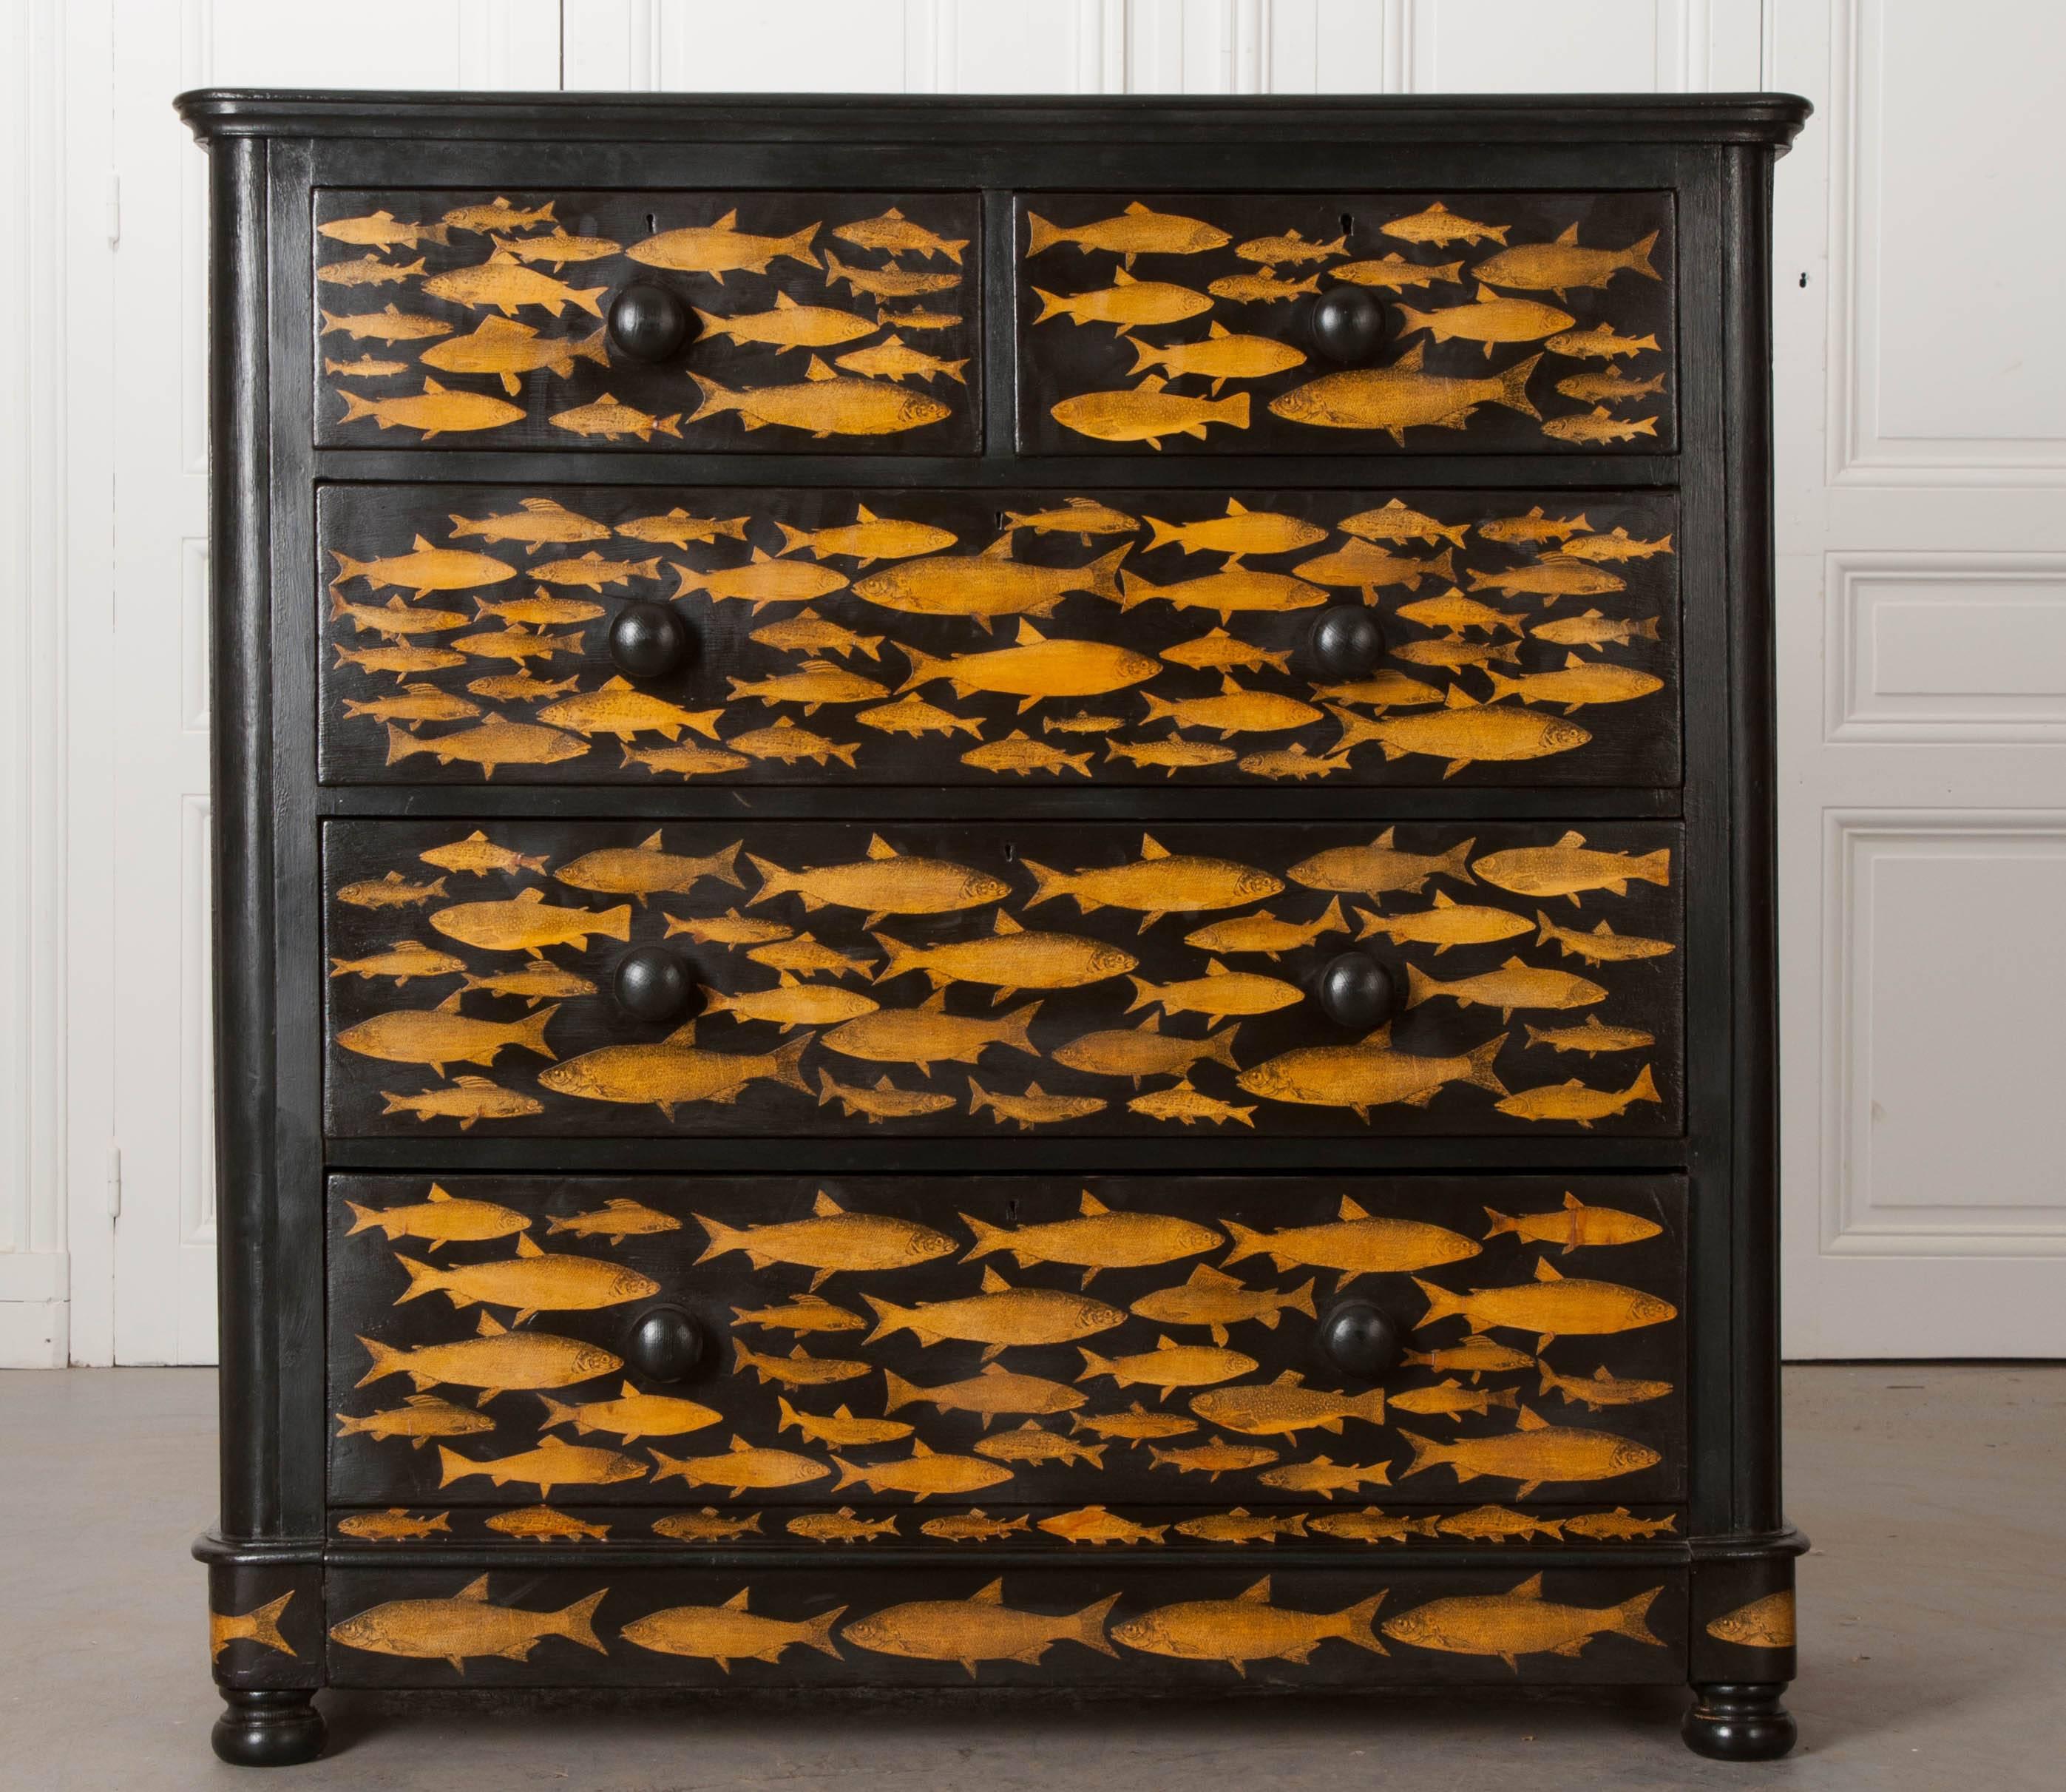 A Victorian, painted five-drawer chest of drawers from 19th century England, that has more recently had wonderful gold fish decoupaged onto the piece. Each drawer has turned, wooden knobs that have also been painted black. The linear, restrained